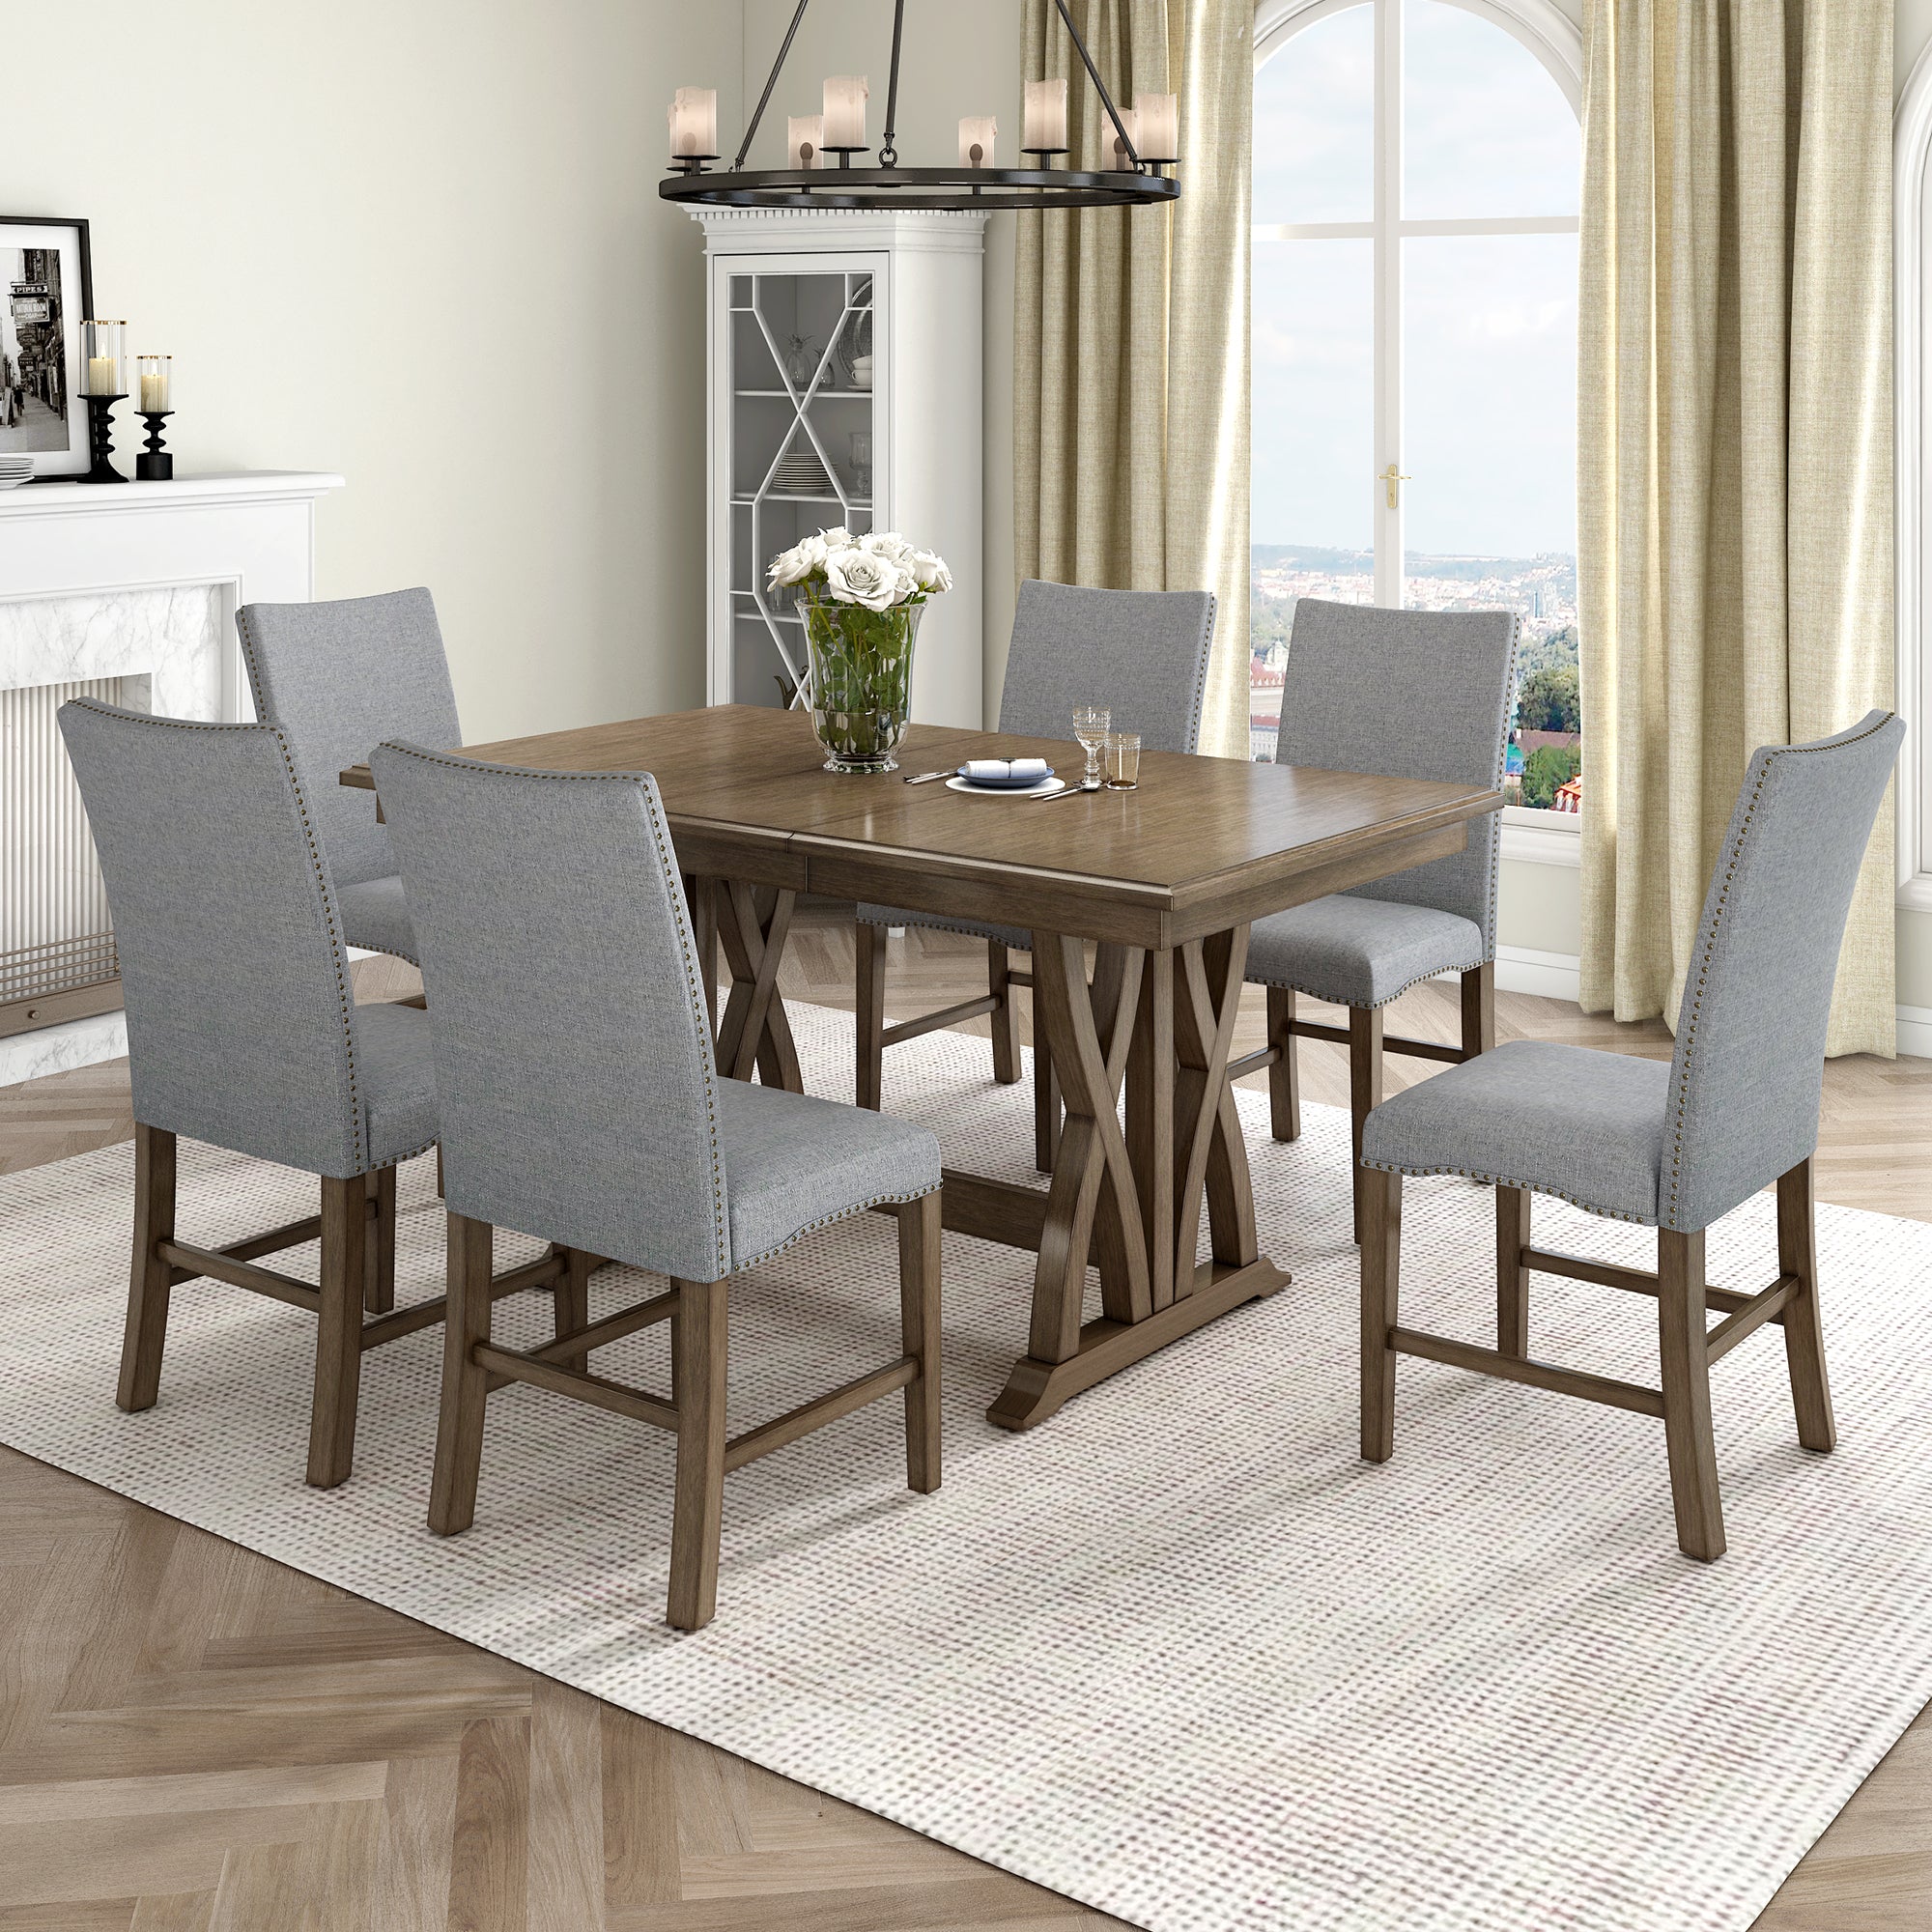 Mid-Century Solid Wood 7-Piece Extendable Dining Table Set - Golden Brown with Gray Cushion Upholstered Chairs, Includes 12" Leaf